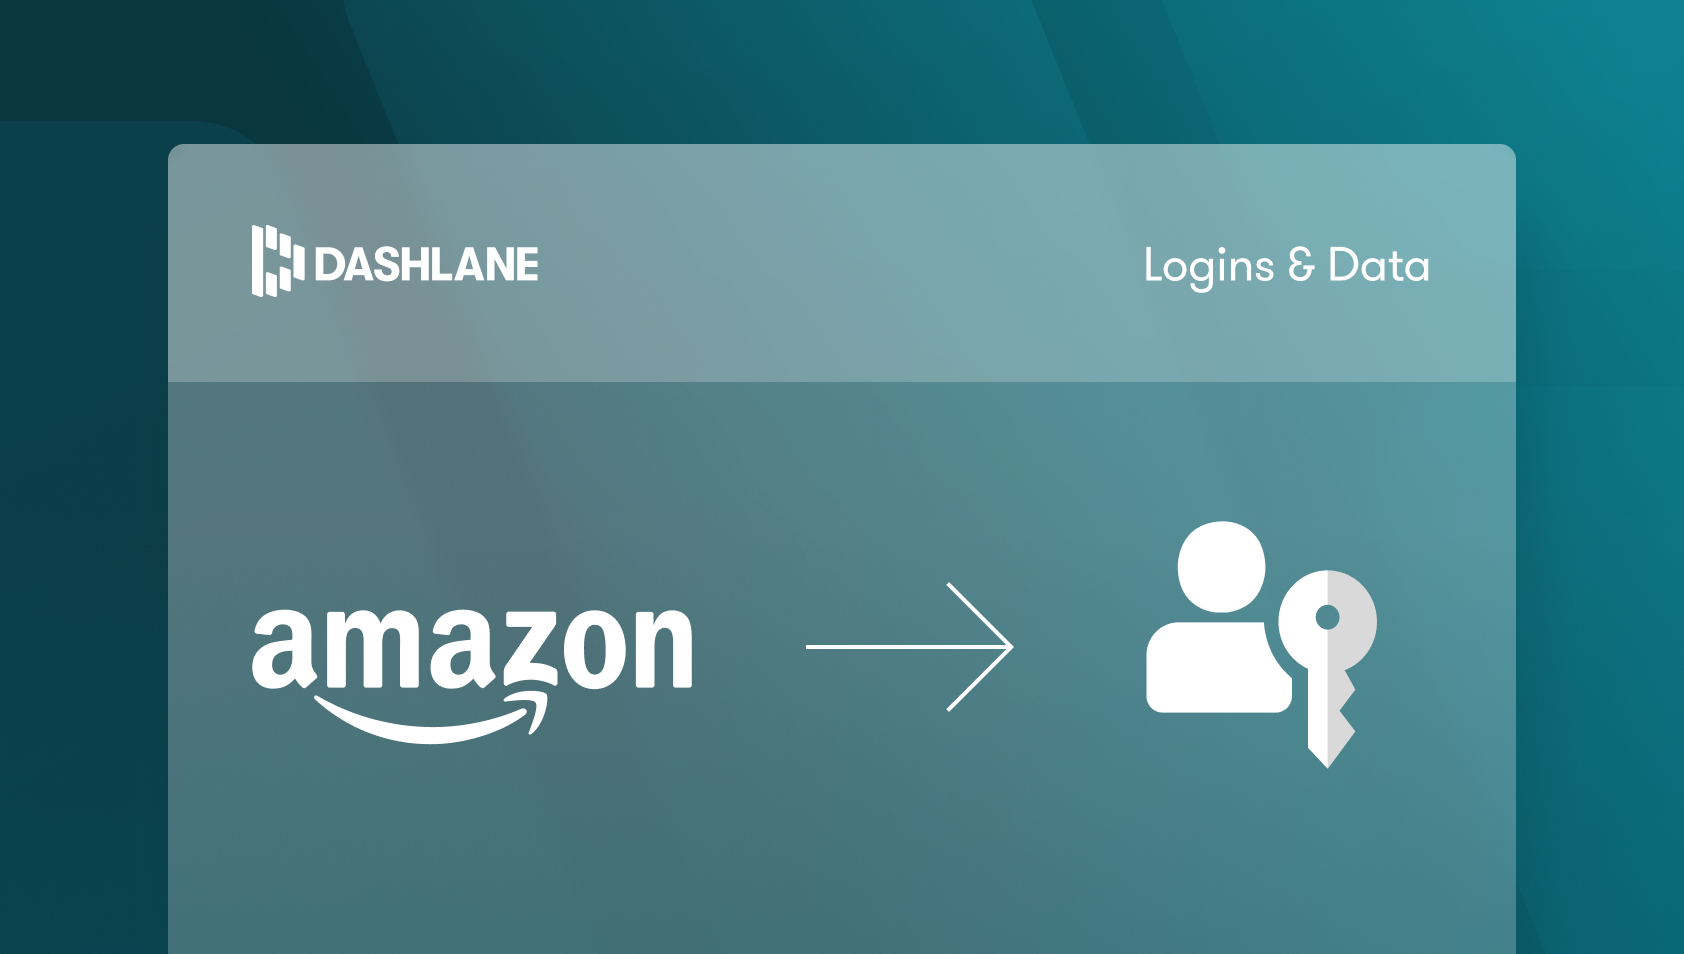 Amazon logo and a key icon representing logging in with a passkey.